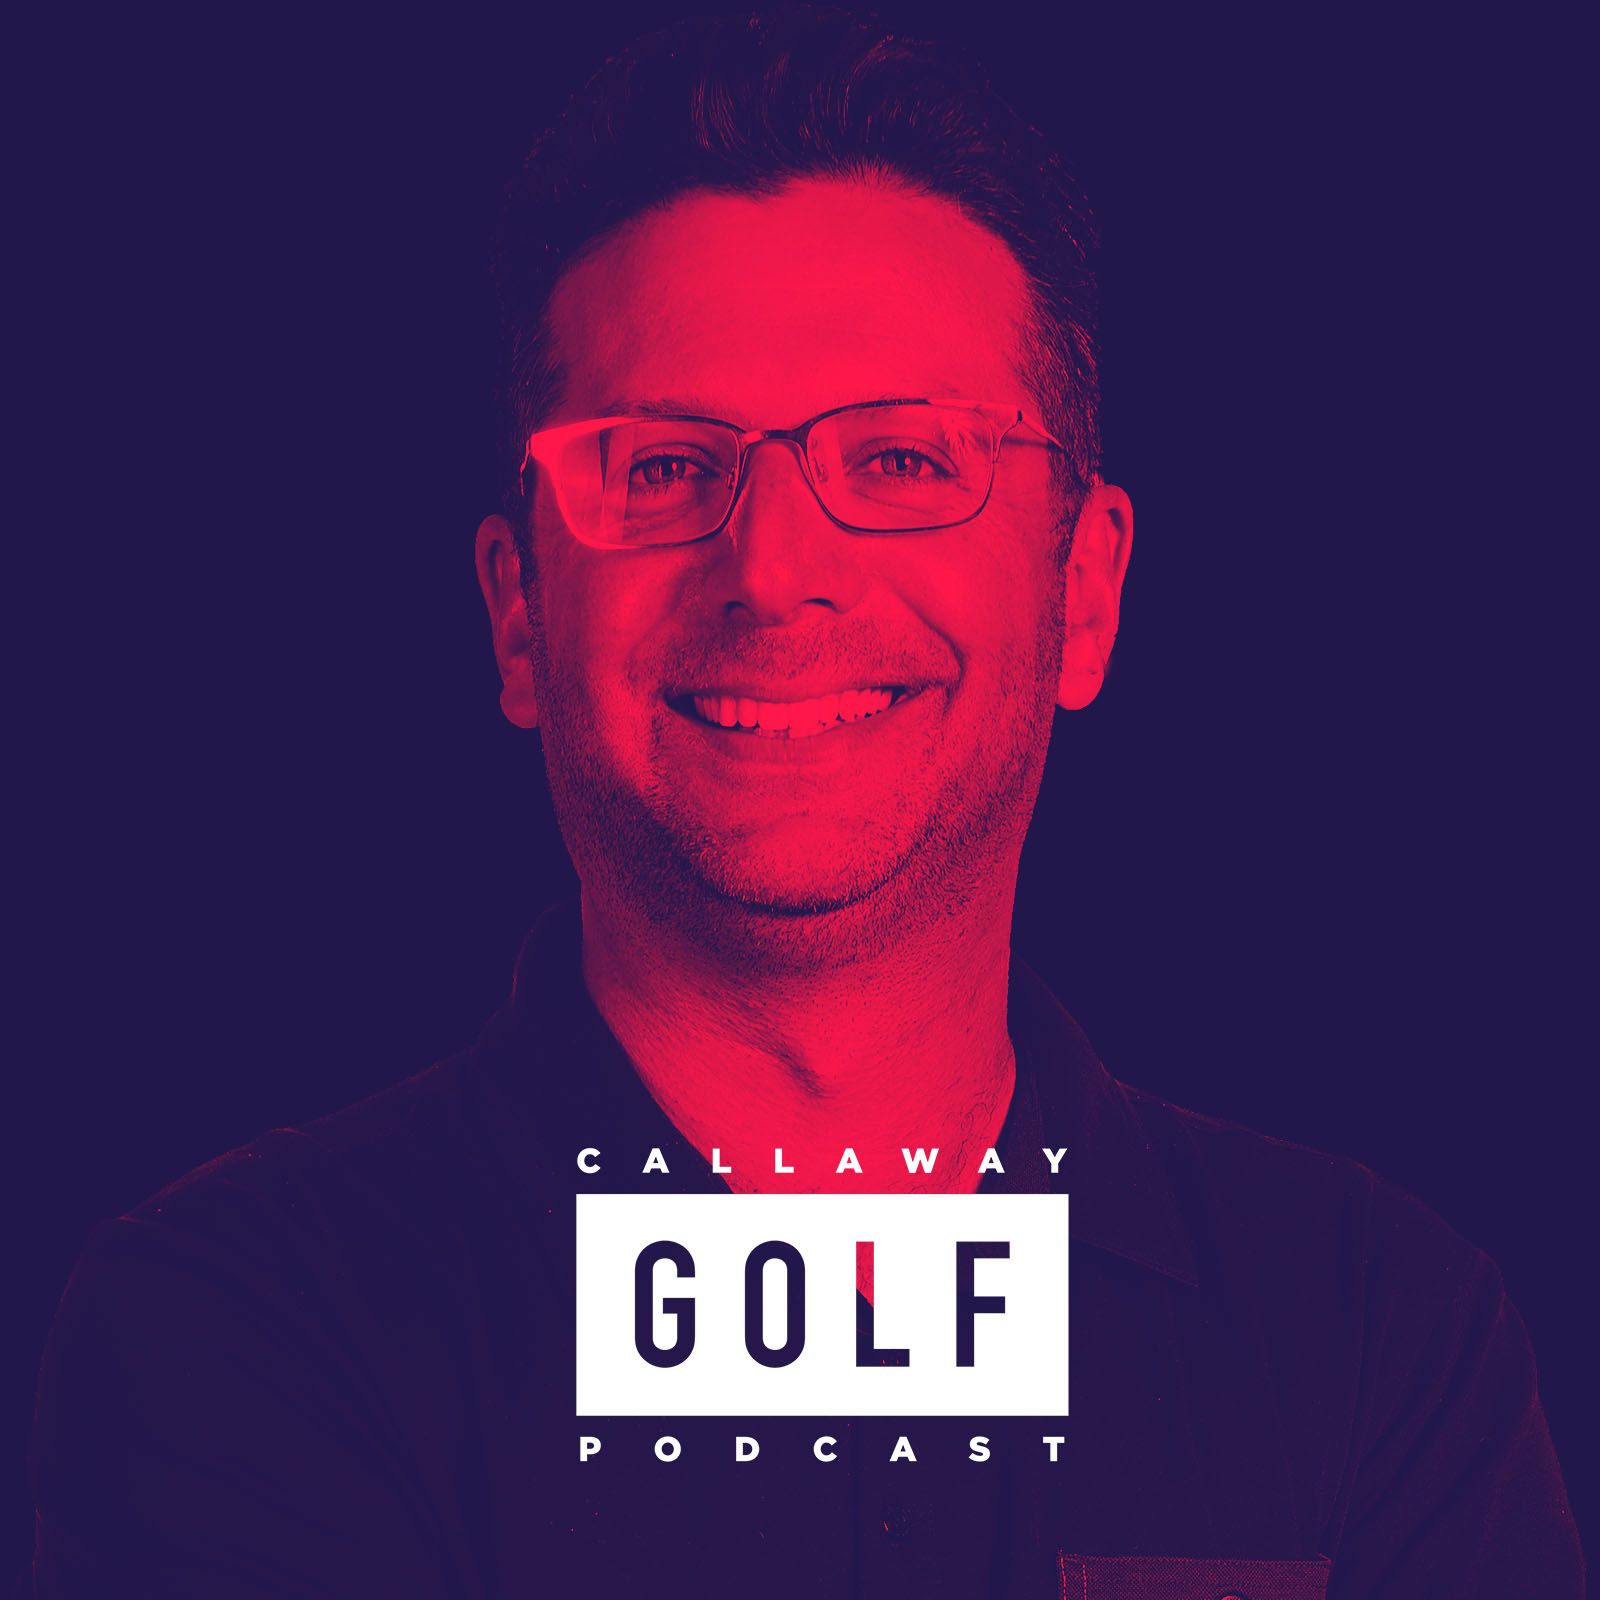 Lefty's Swing Coach Andrew Getson Swings By & DNevs Reveals B21 Family || Callaway Golf Podcast 394